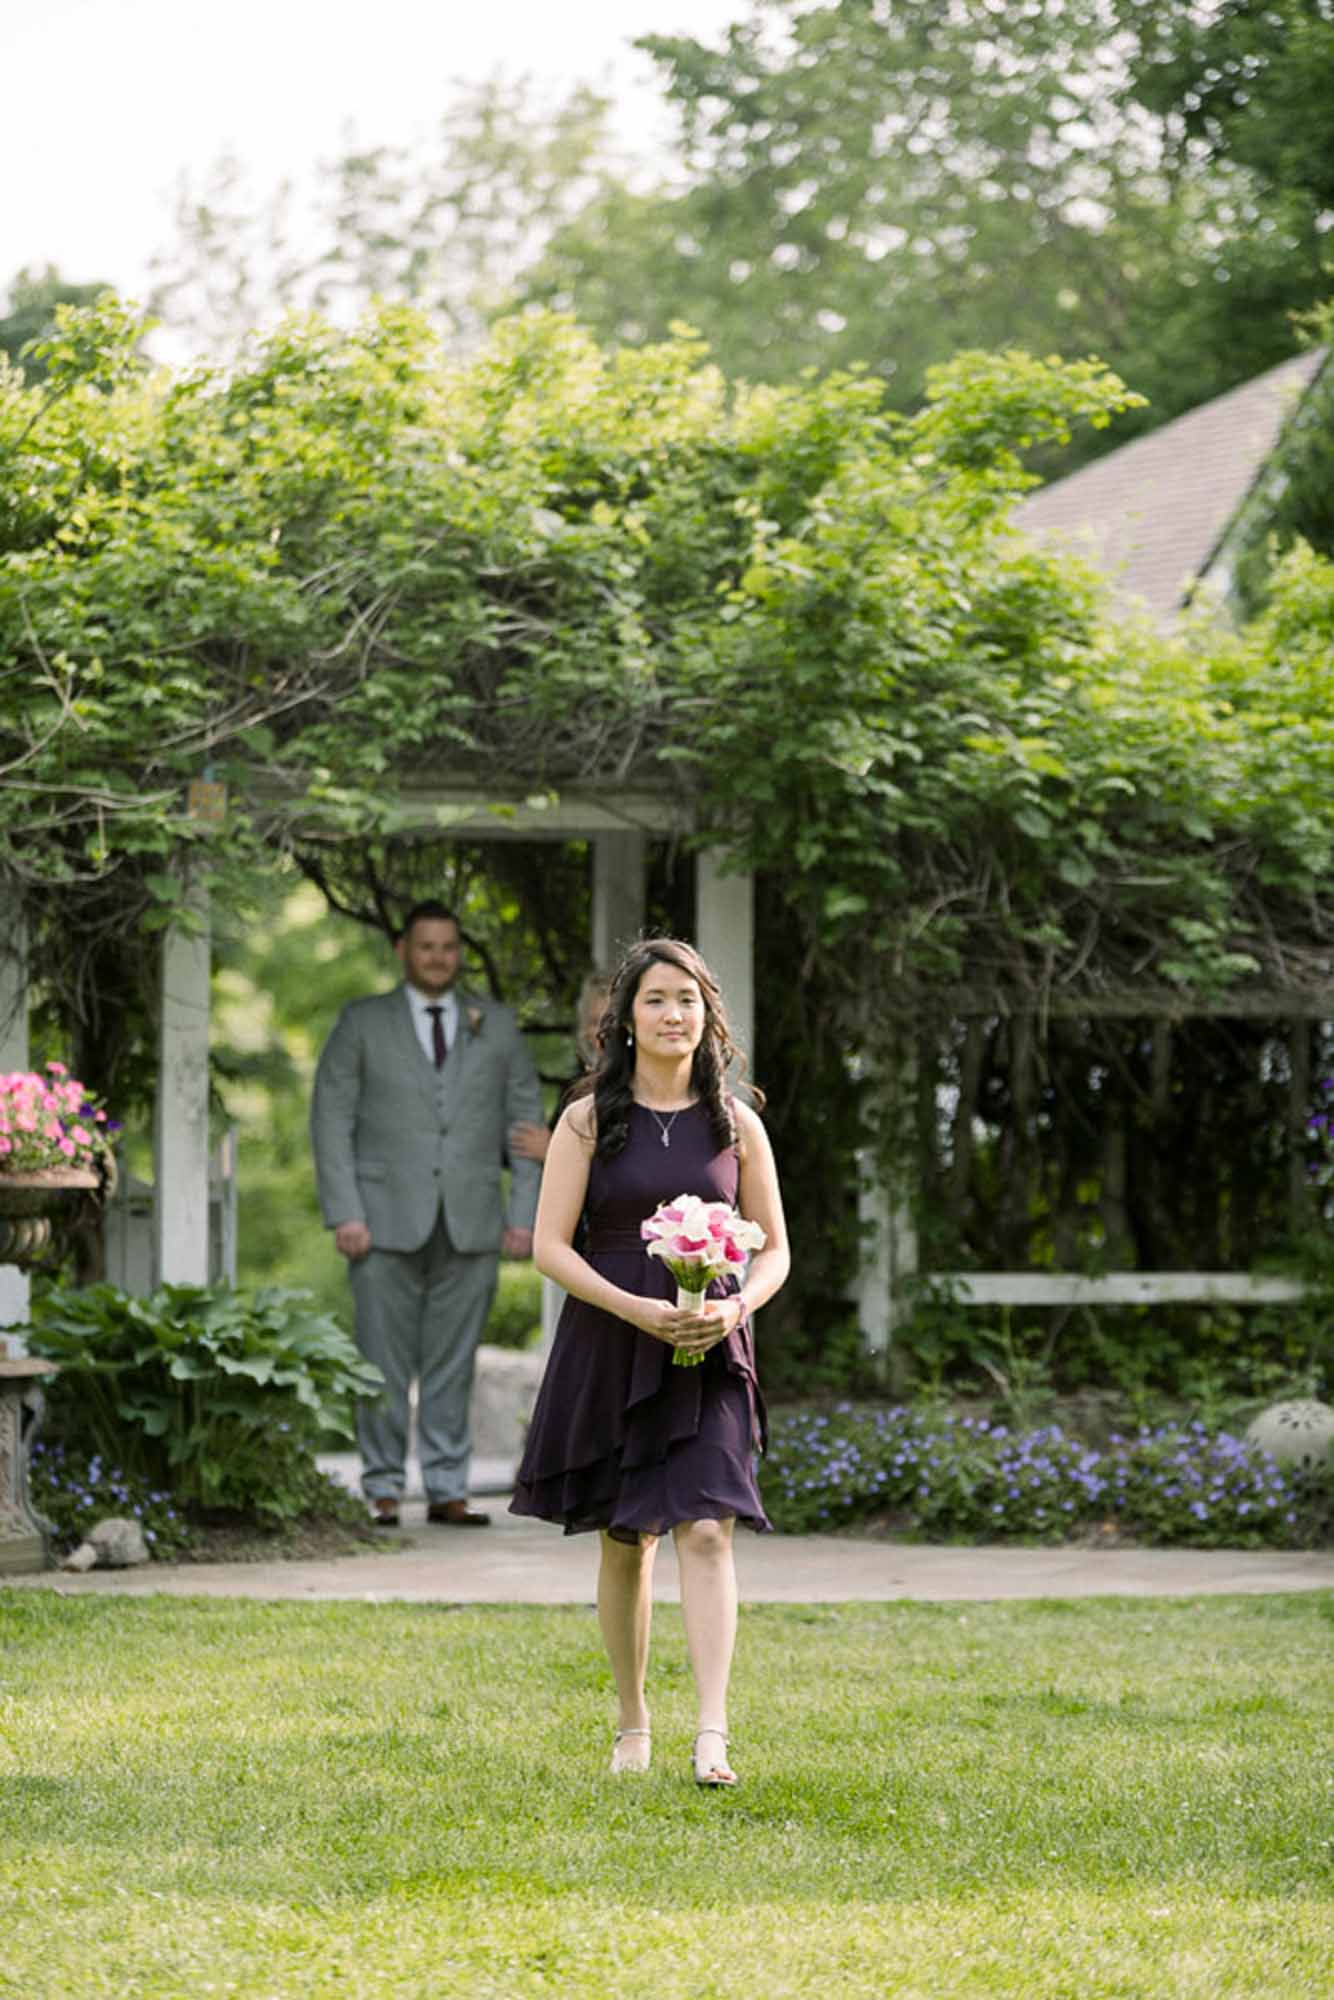 processional groomsmaid in purple dress LGBTQ+ wedding featured on Equally Wed magazine with two grooms Brian + Brett: Hudson Valley garden wedding with shades of purple Upasana Mainali Photography outdoor wedding ceremony